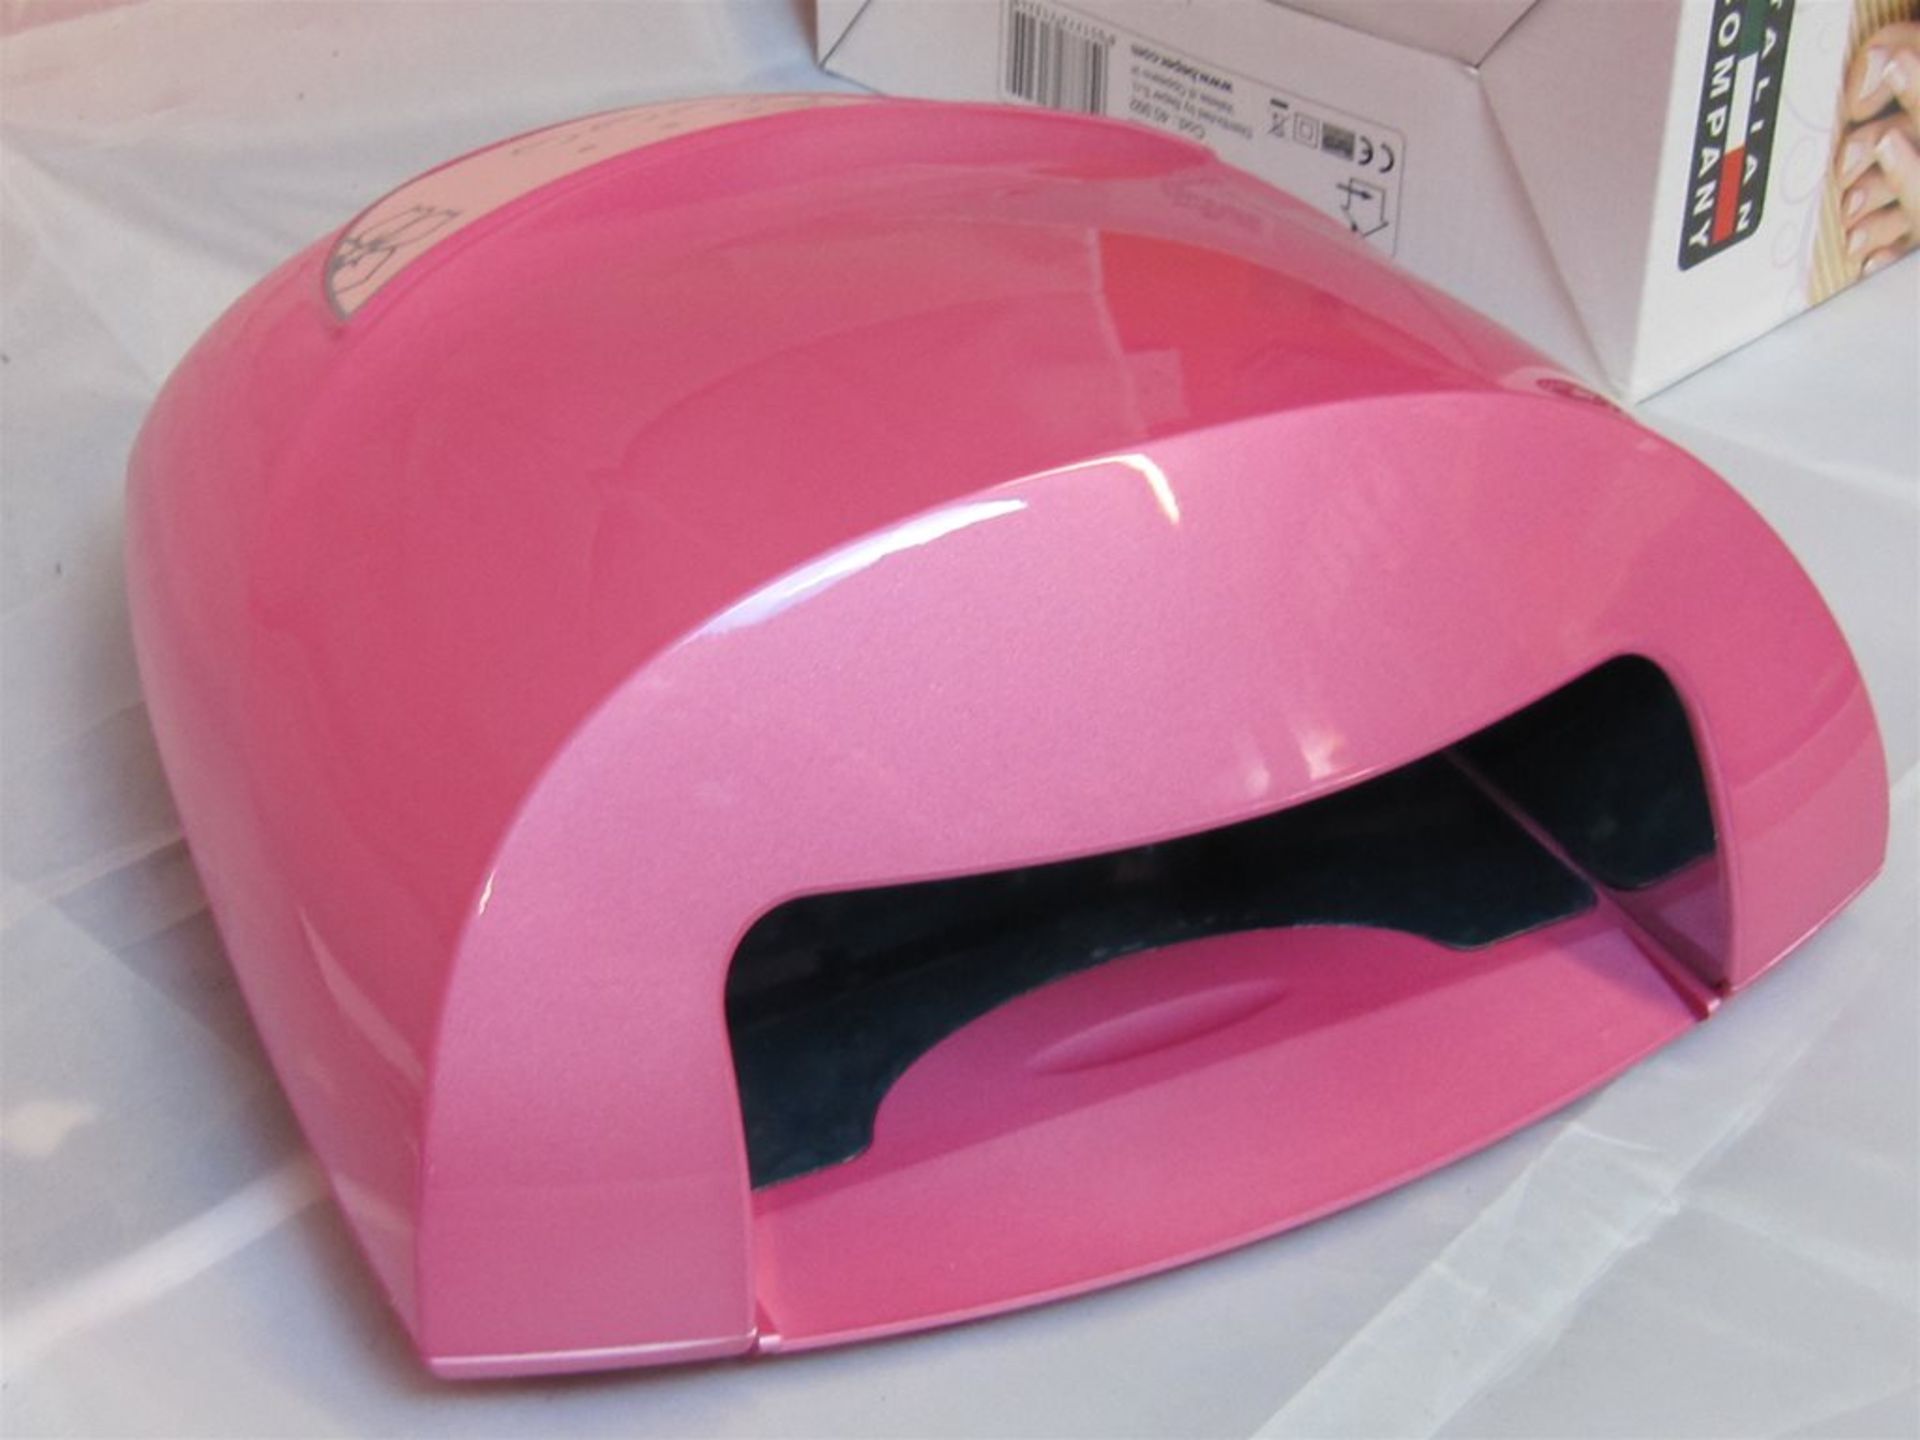 73) Beper LED Nail Lamp. 12w Rapid Dry Time. No vat on Hammer. - Image 3 of 4